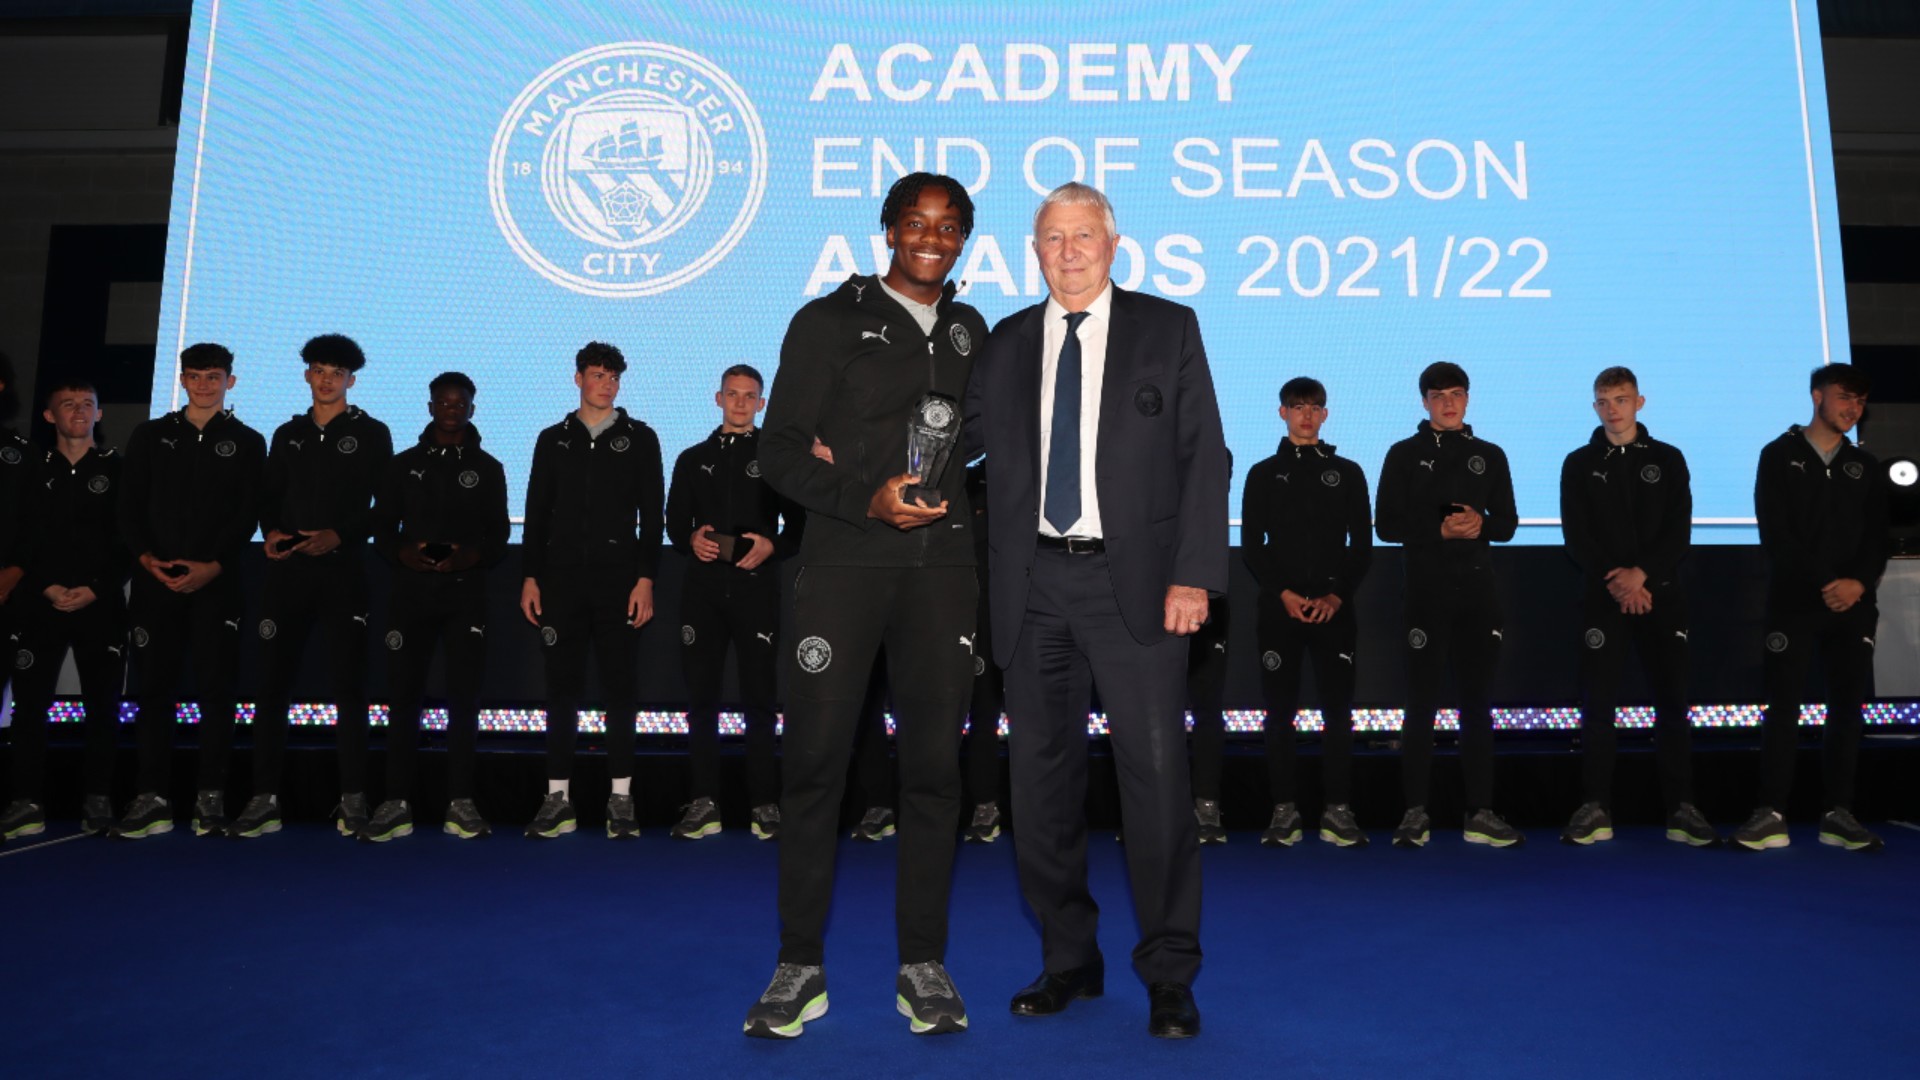 WING WIZARD: Adedire Mebude proudly poses with City legend Mike Summerbee